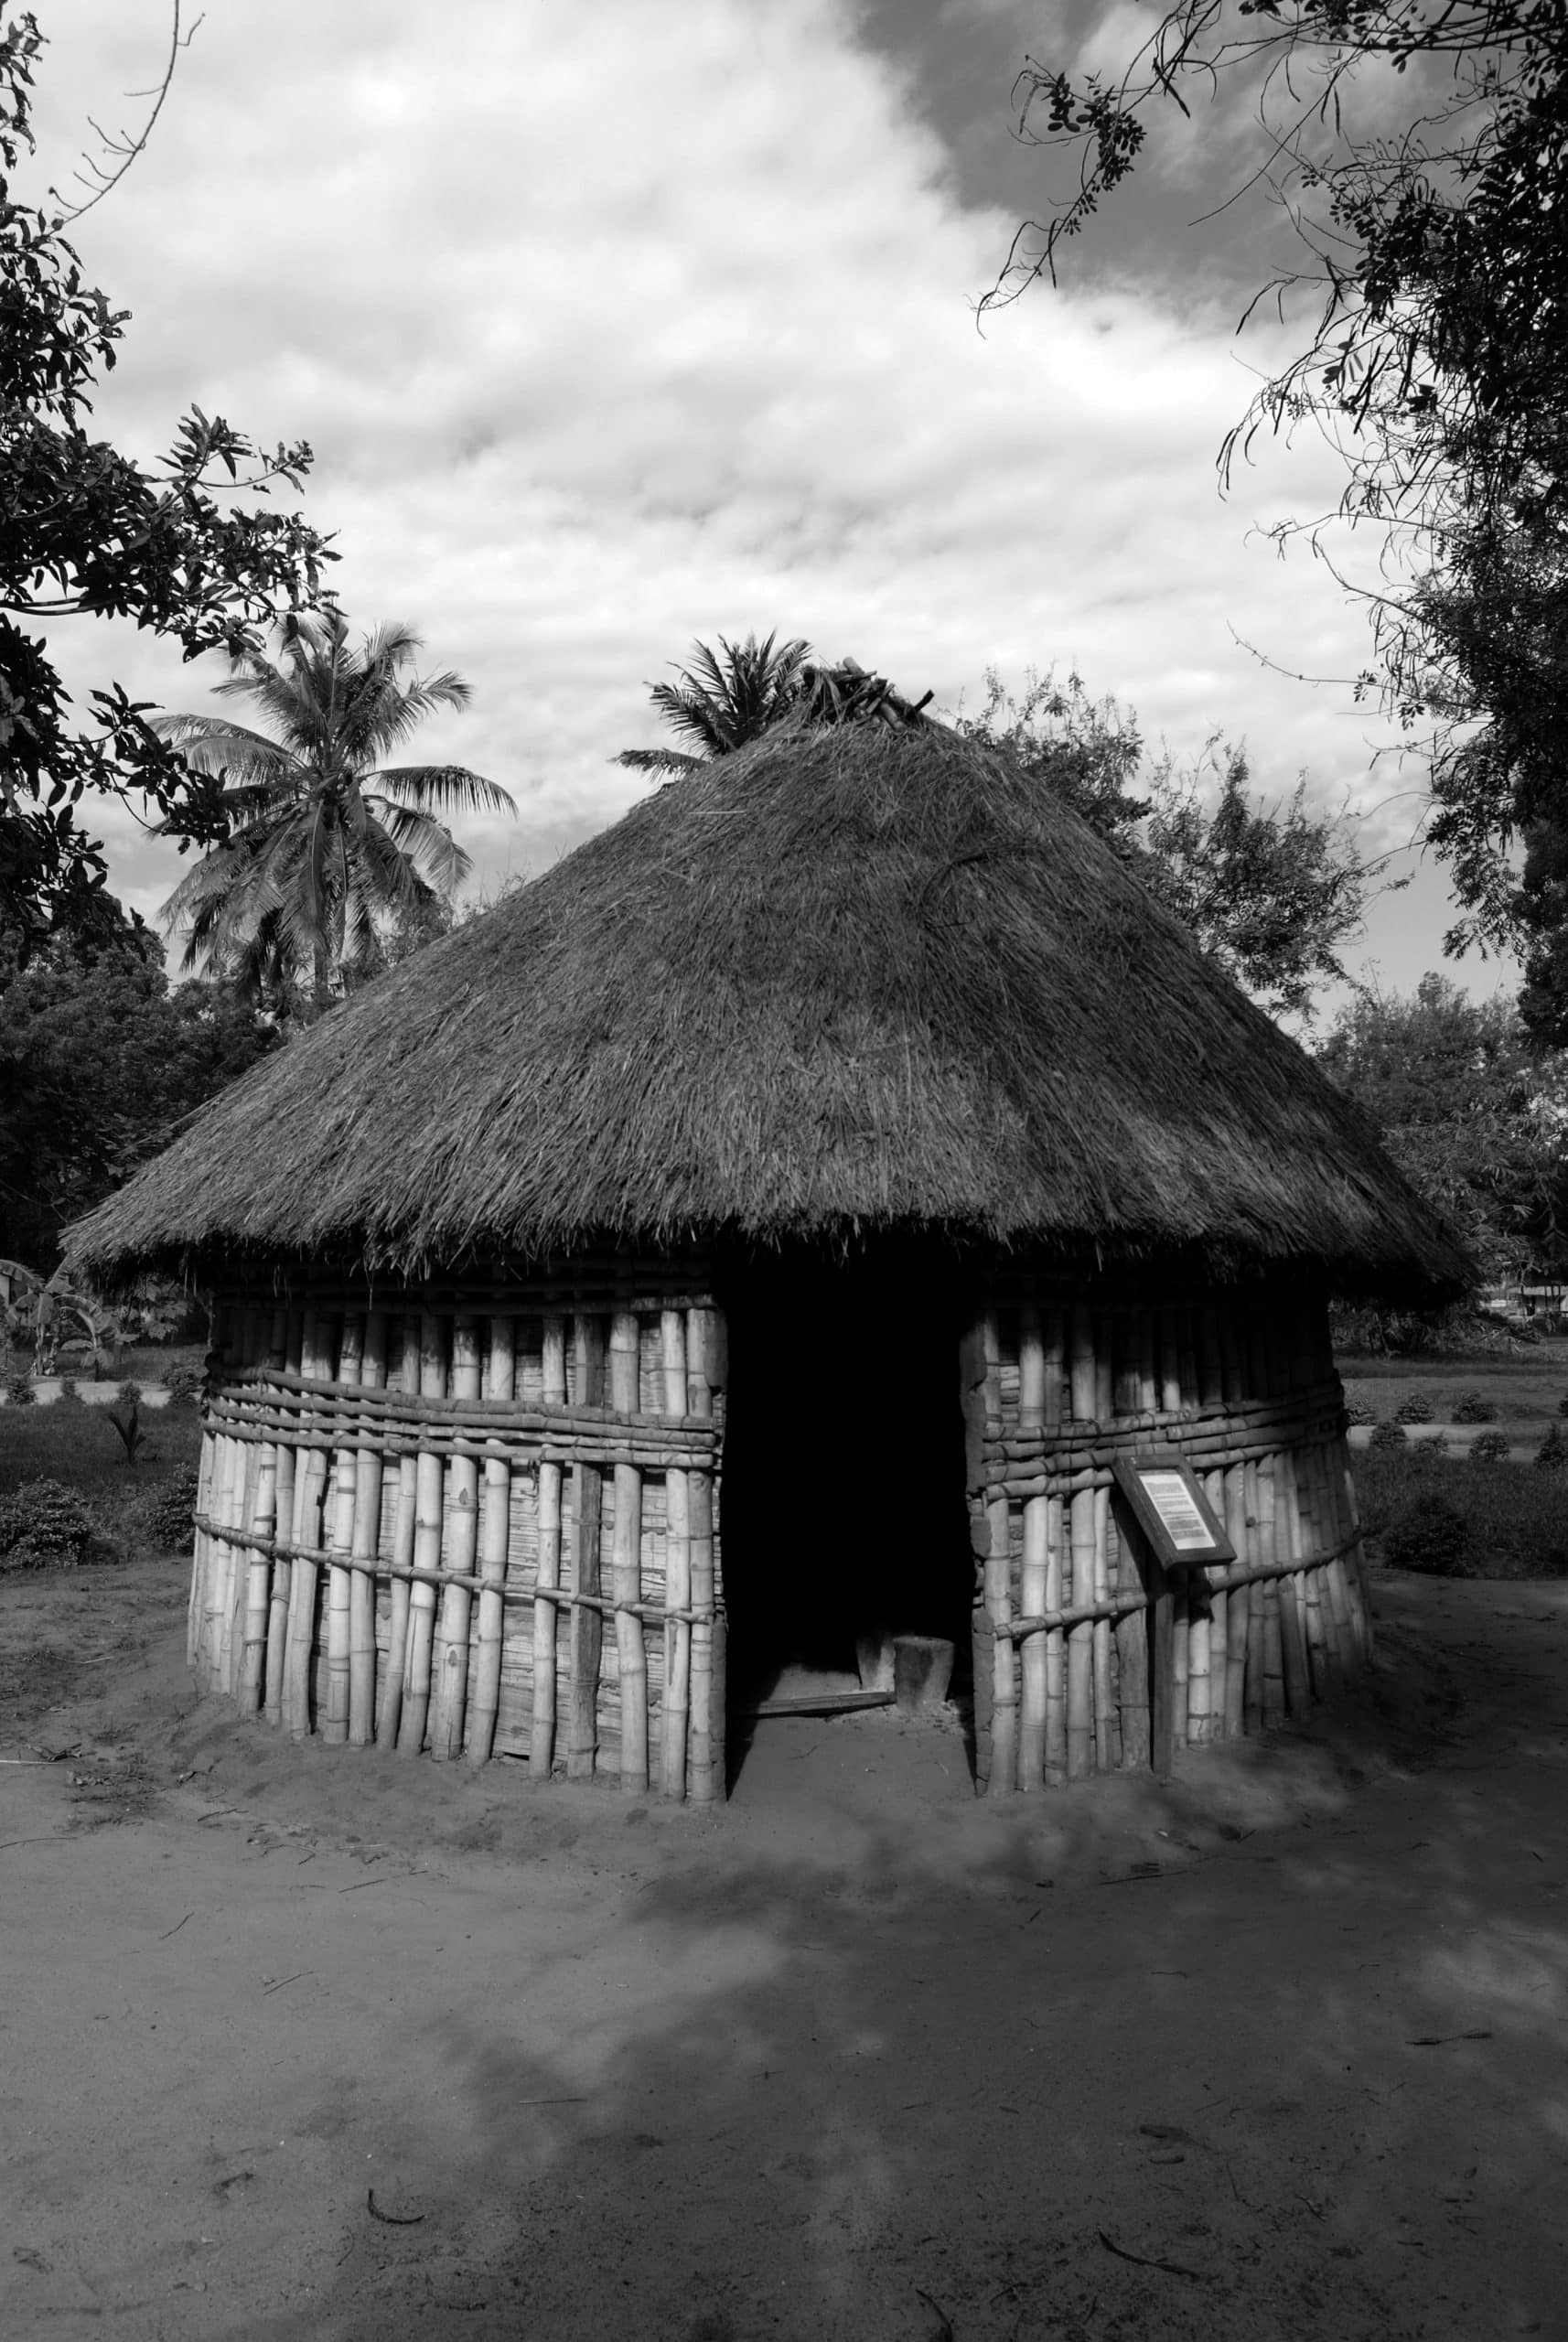 One of the Tanzanian tribes traditional houses on display at the Village Museum